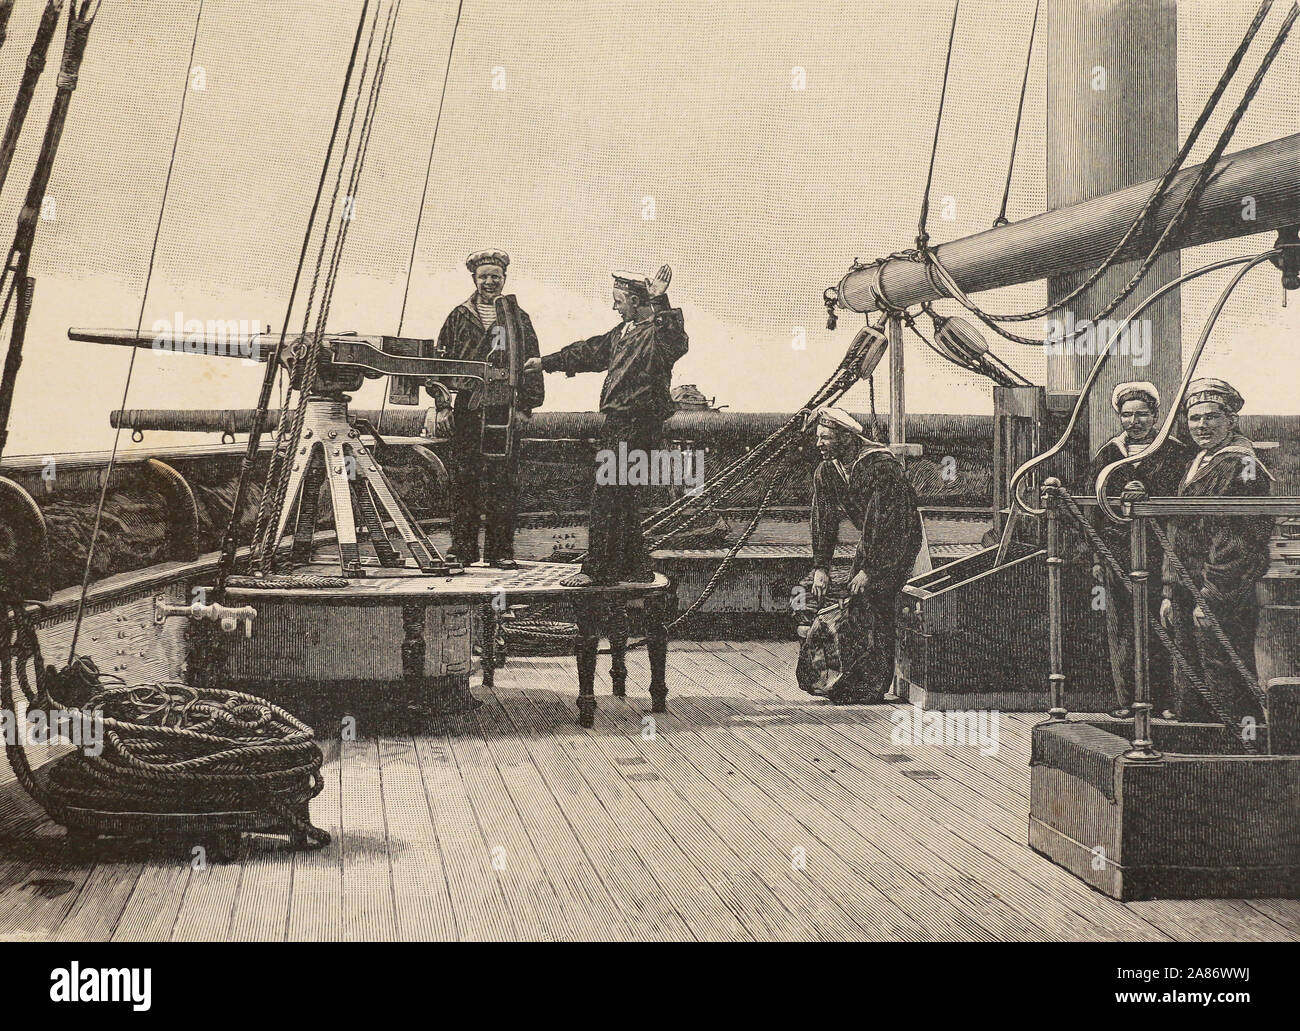 Russian sailors on the ship. Engraving of the 19th century. Stock Photo